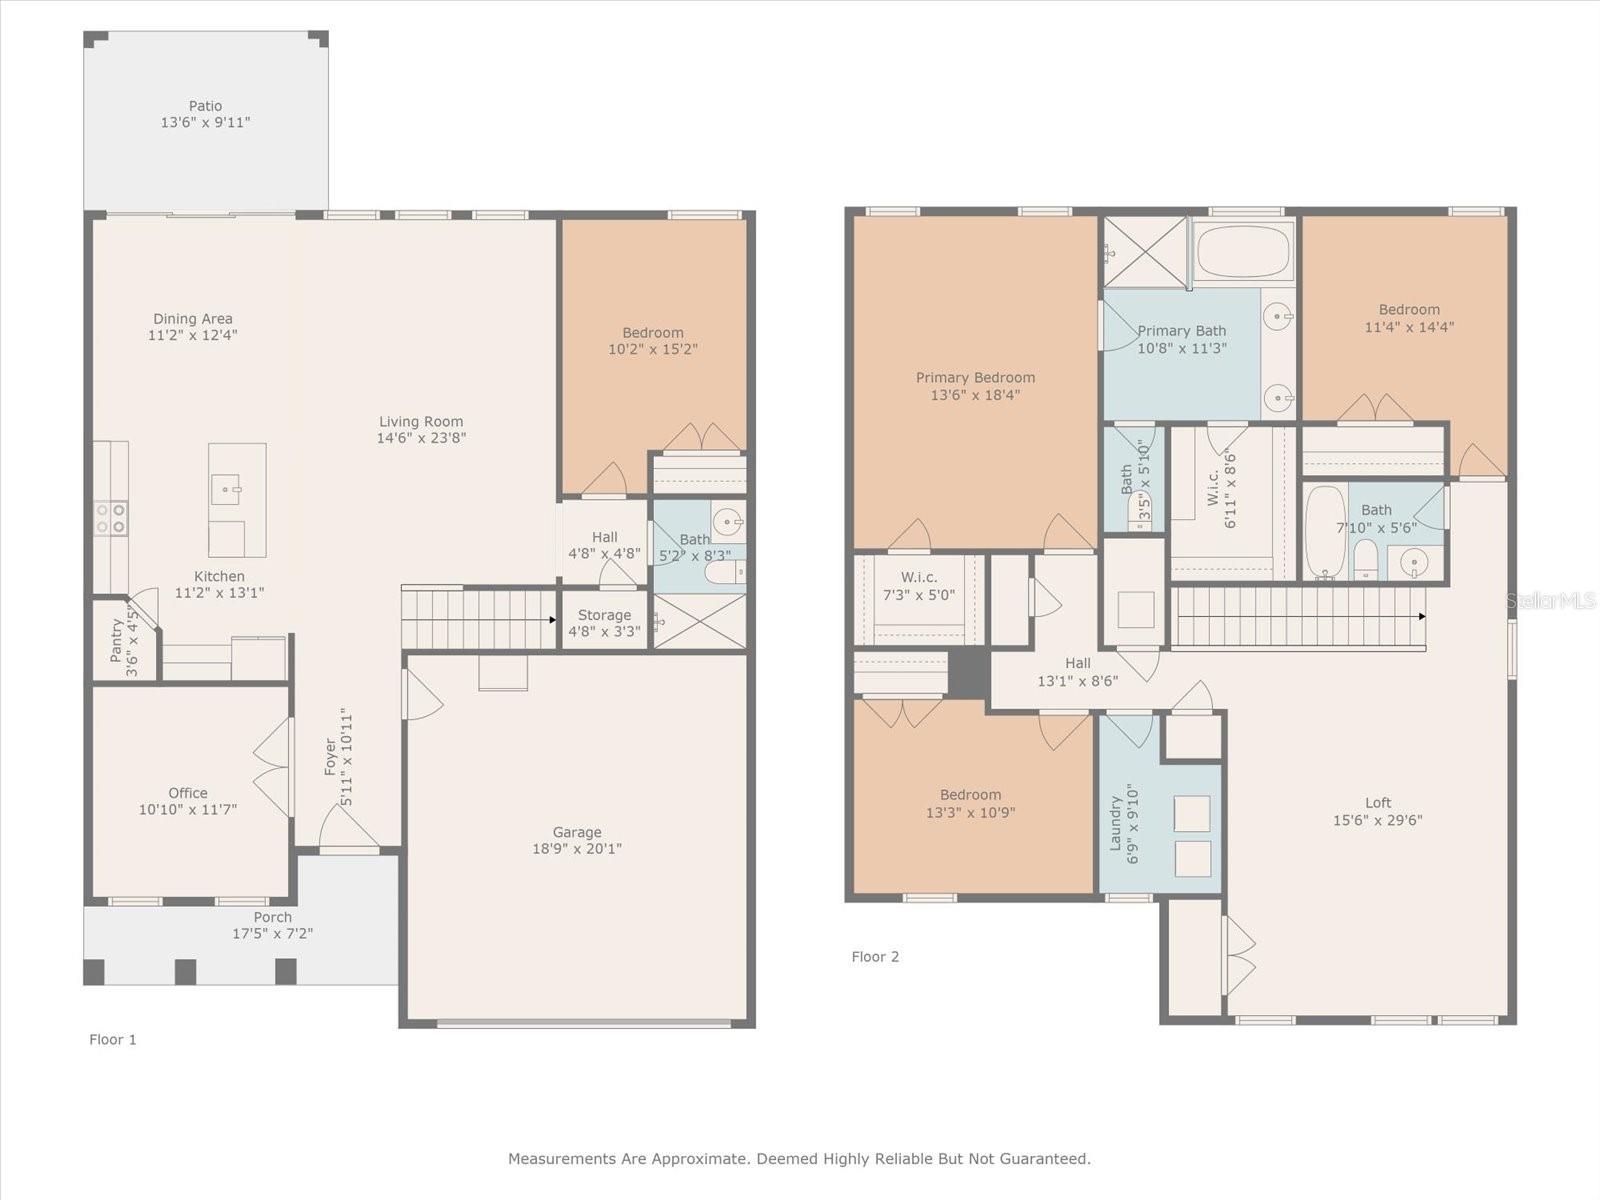 This 2,756 sqft floor plan must be seen to be believed!Measurements to be verified by the buyer.